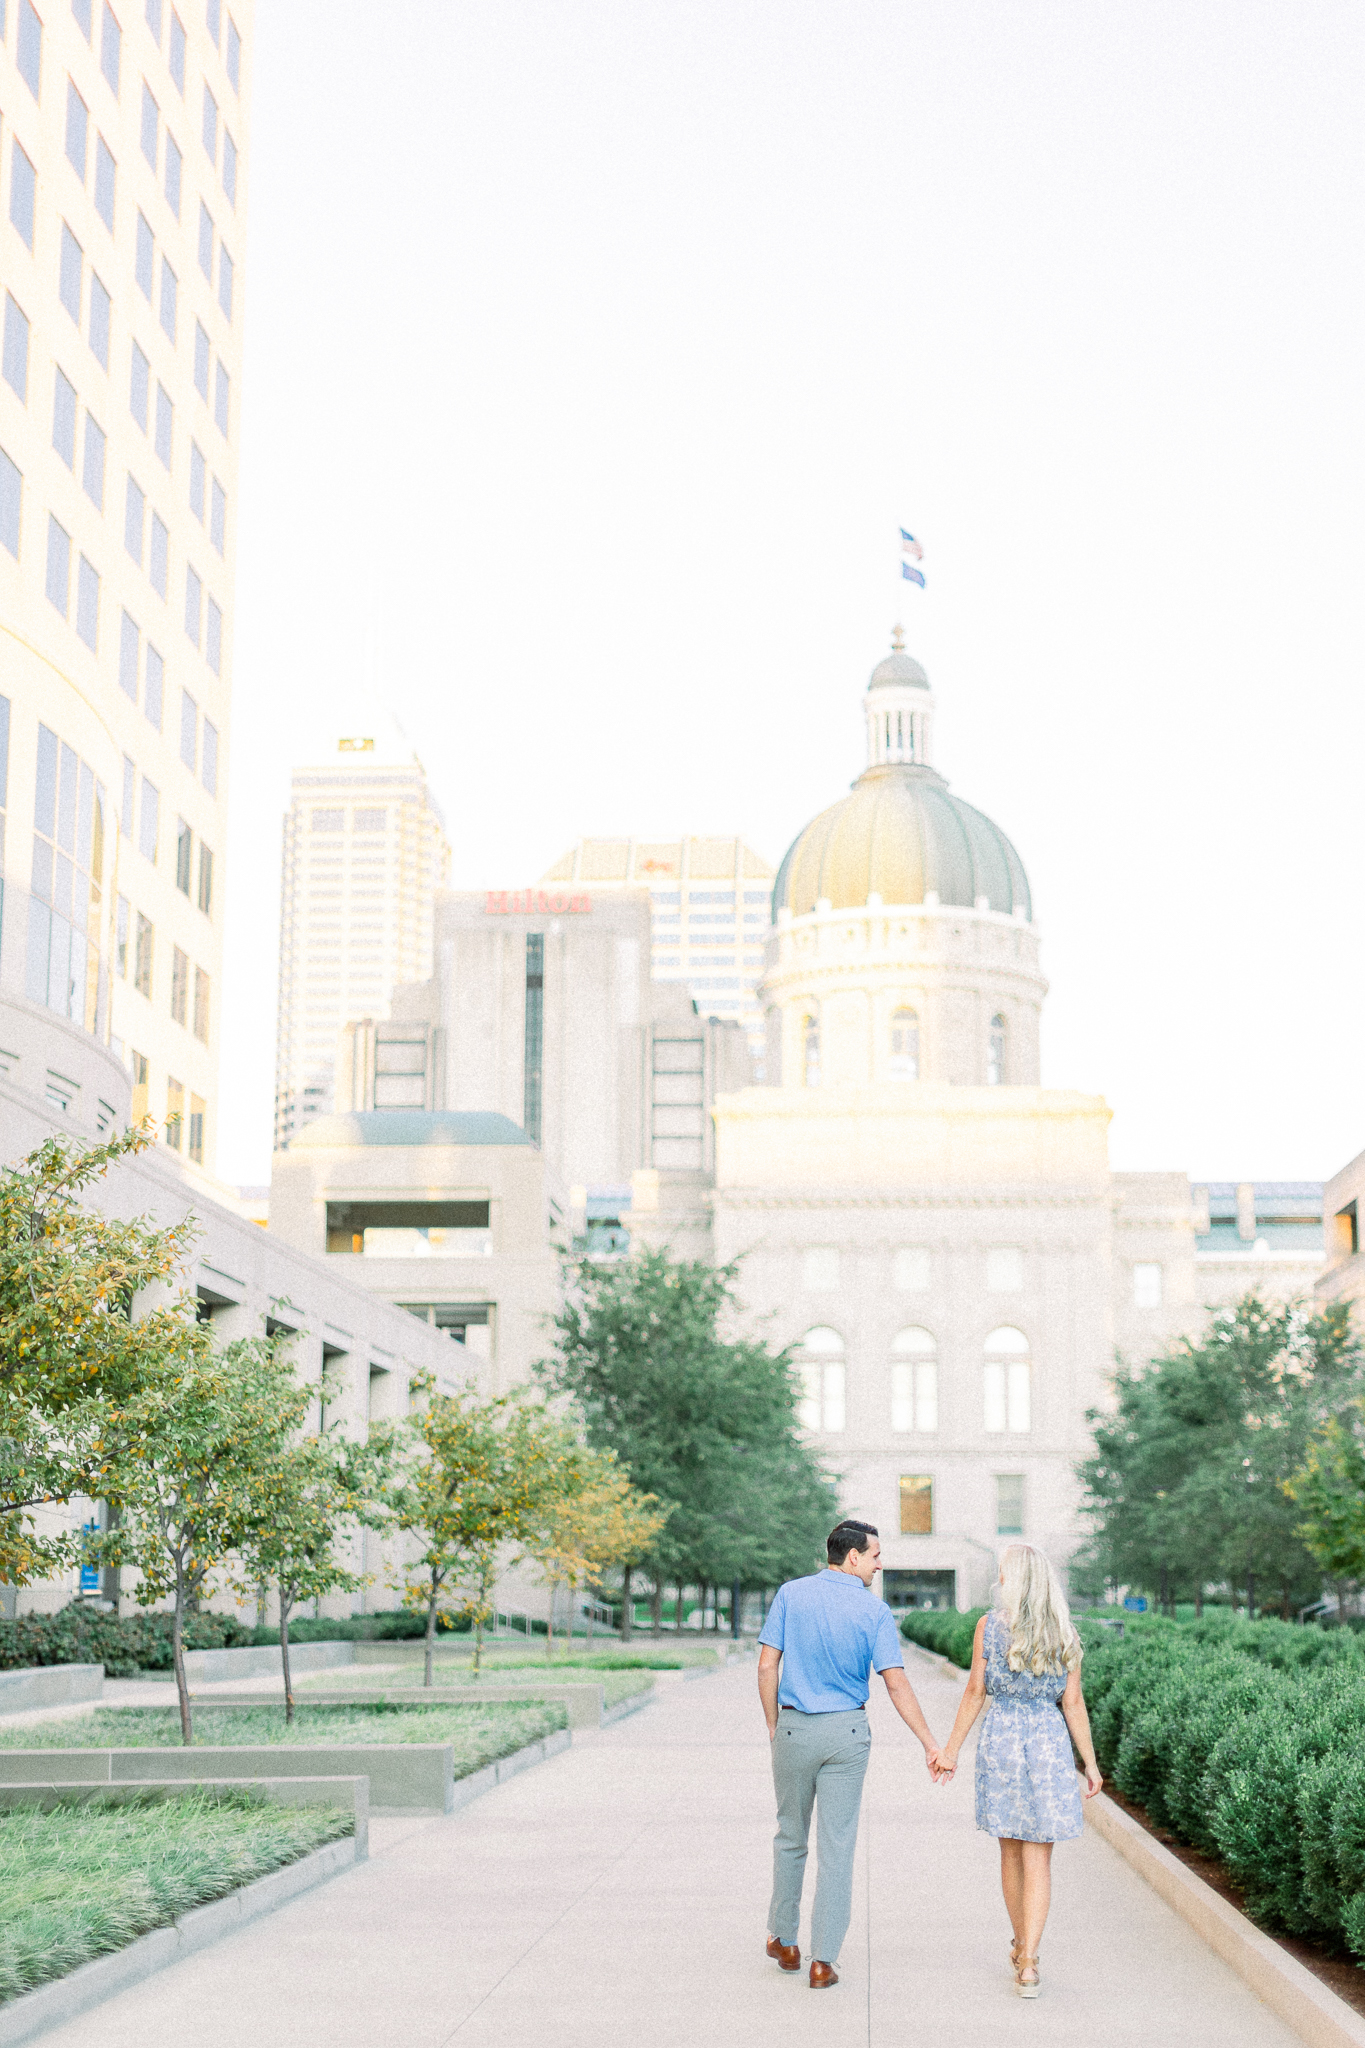 hayley-moore-photography-alyssa-mason-downtown-indy-engagement-photographer